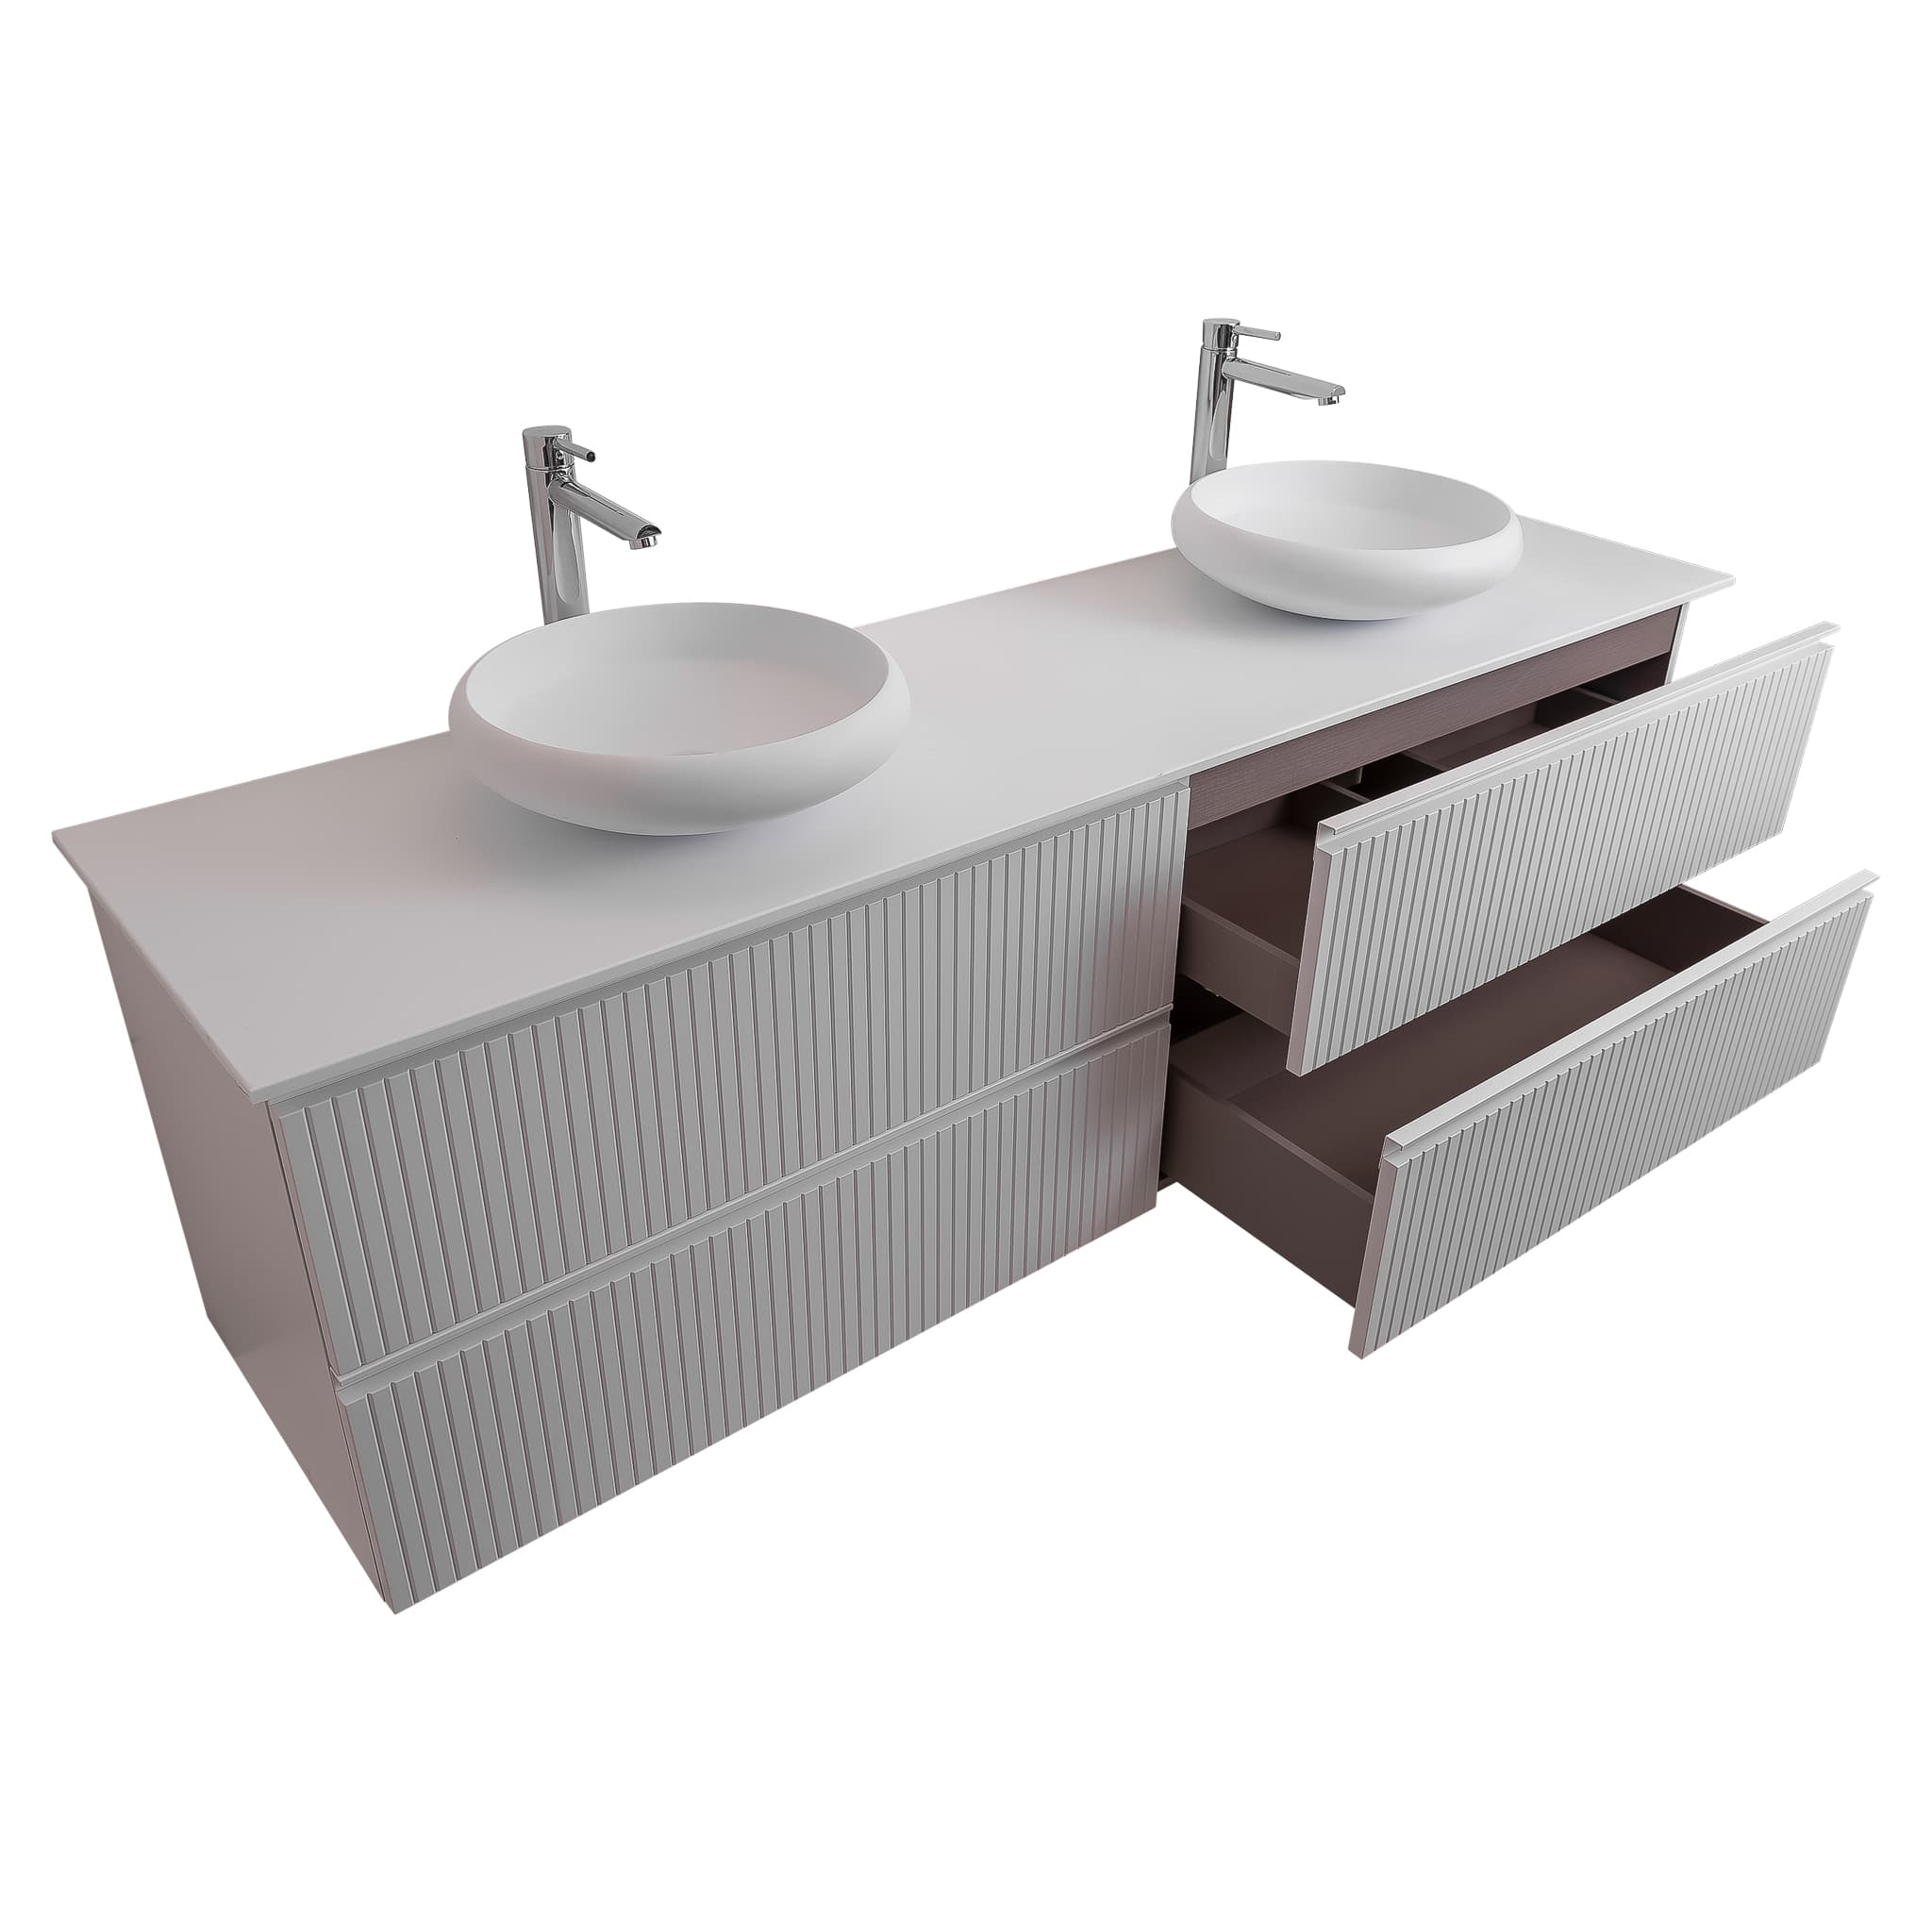 Ares 63 Matte White Cabinet, Solid Surface Flat White Counter And Two Round Solid Surface White Basin 1153, Wall Mounted Modern Vanity Set